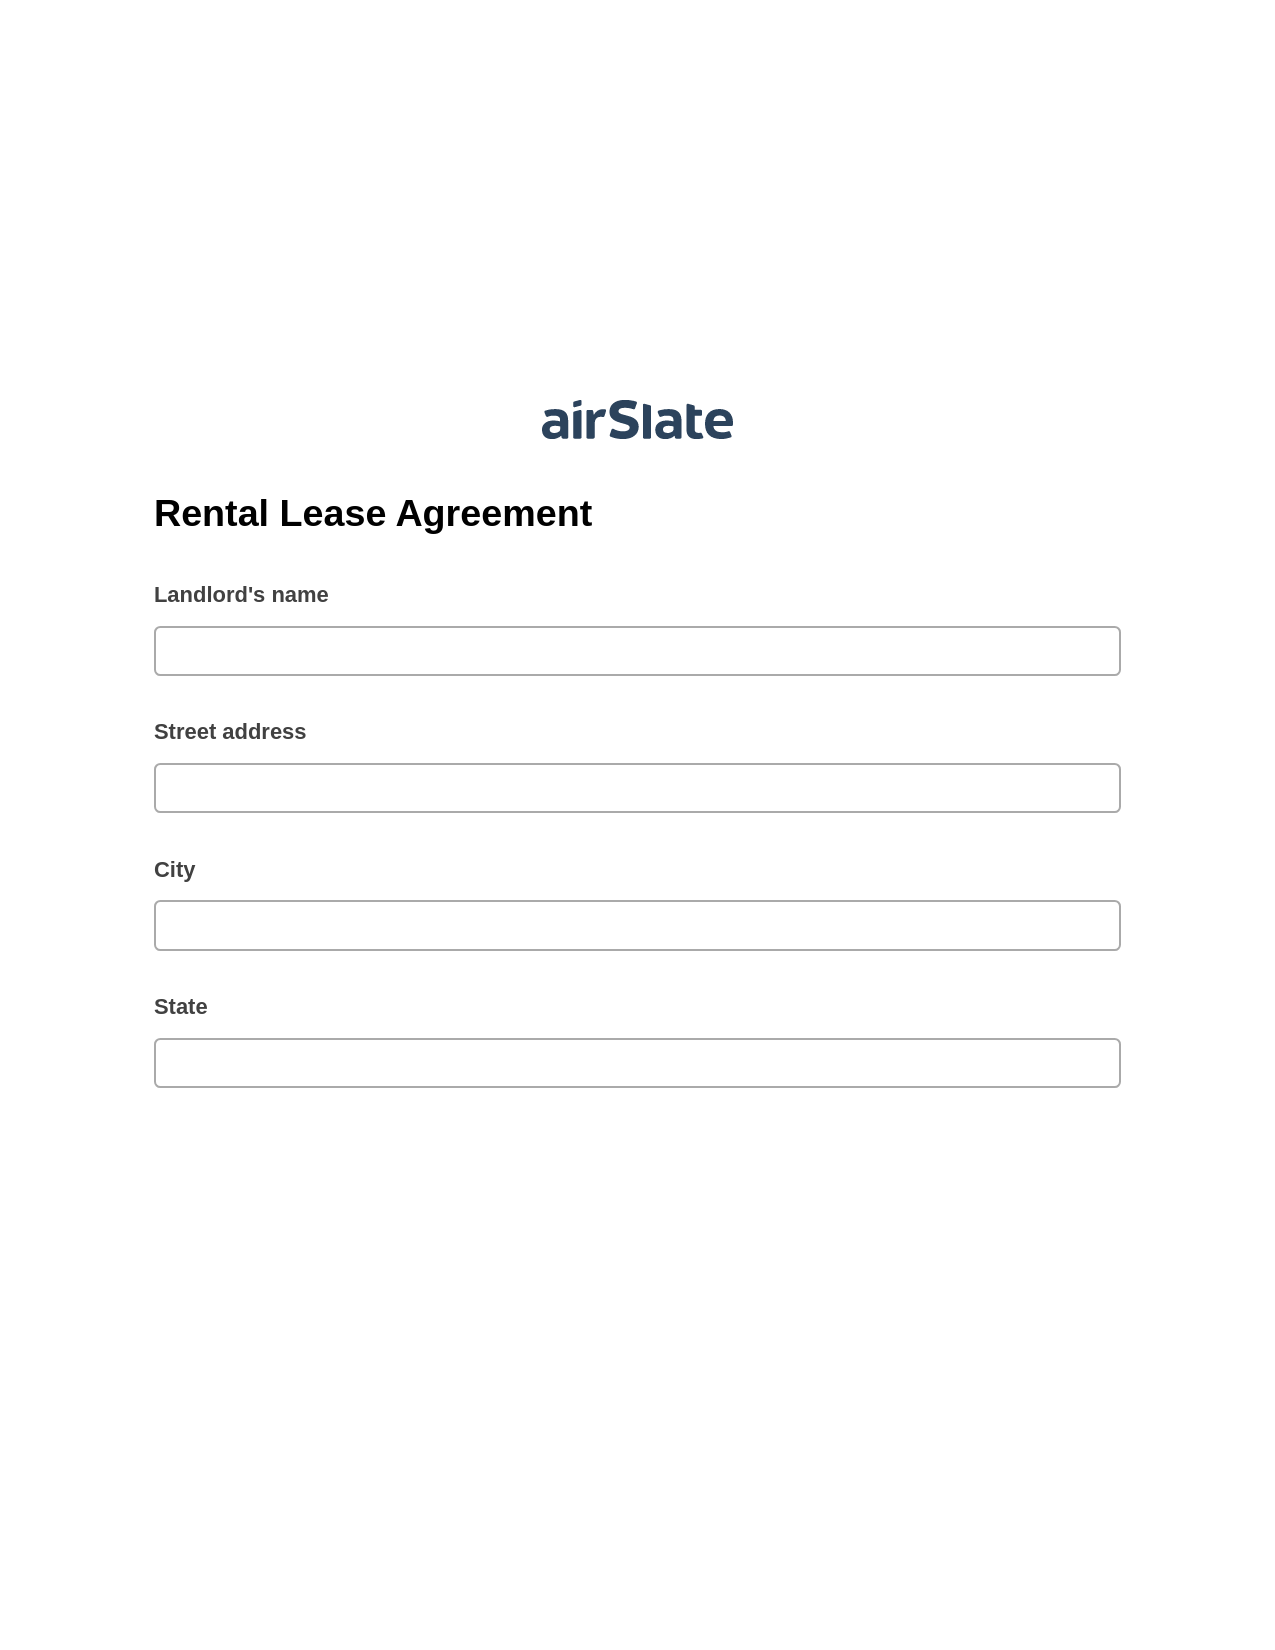 Rental Lease Agreement Pre-fill Dropdown from Airtable, Update NetSuite Records Bot, Export to MySQL Bot